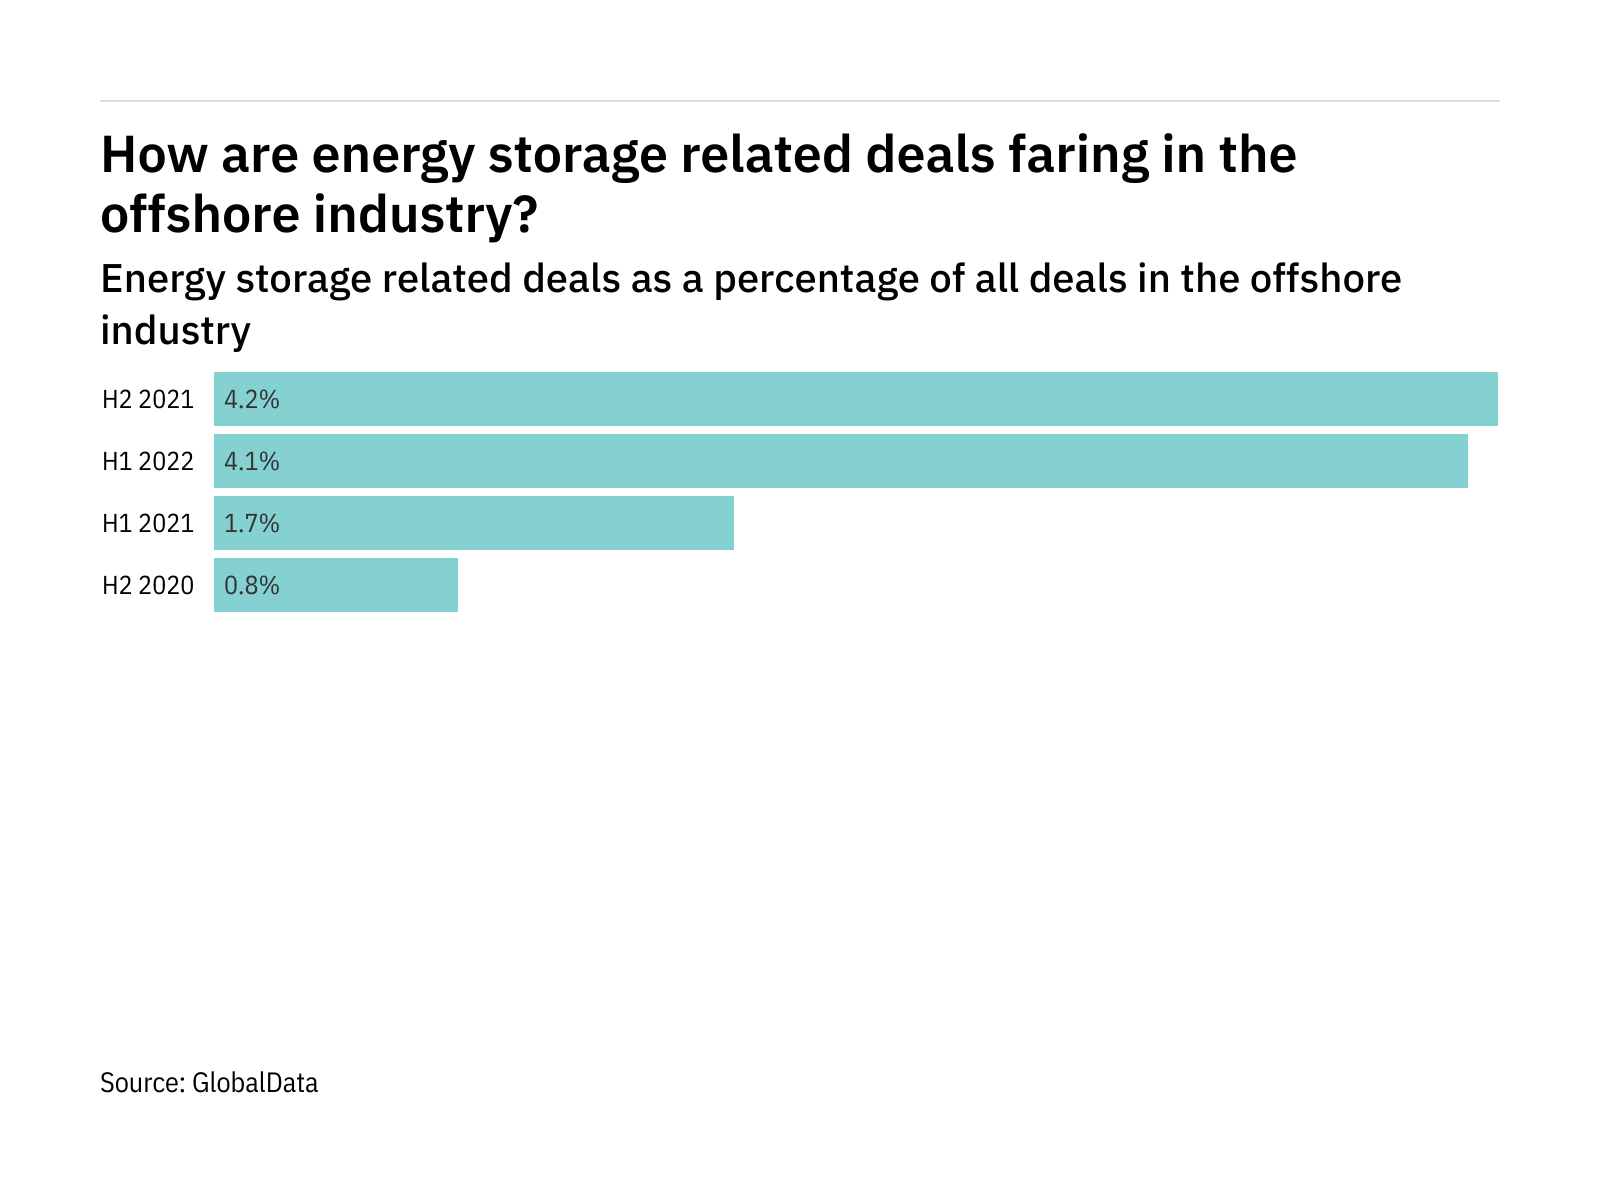 Deals relating to energy storage increased significantly in the offshore industry in H1 2022